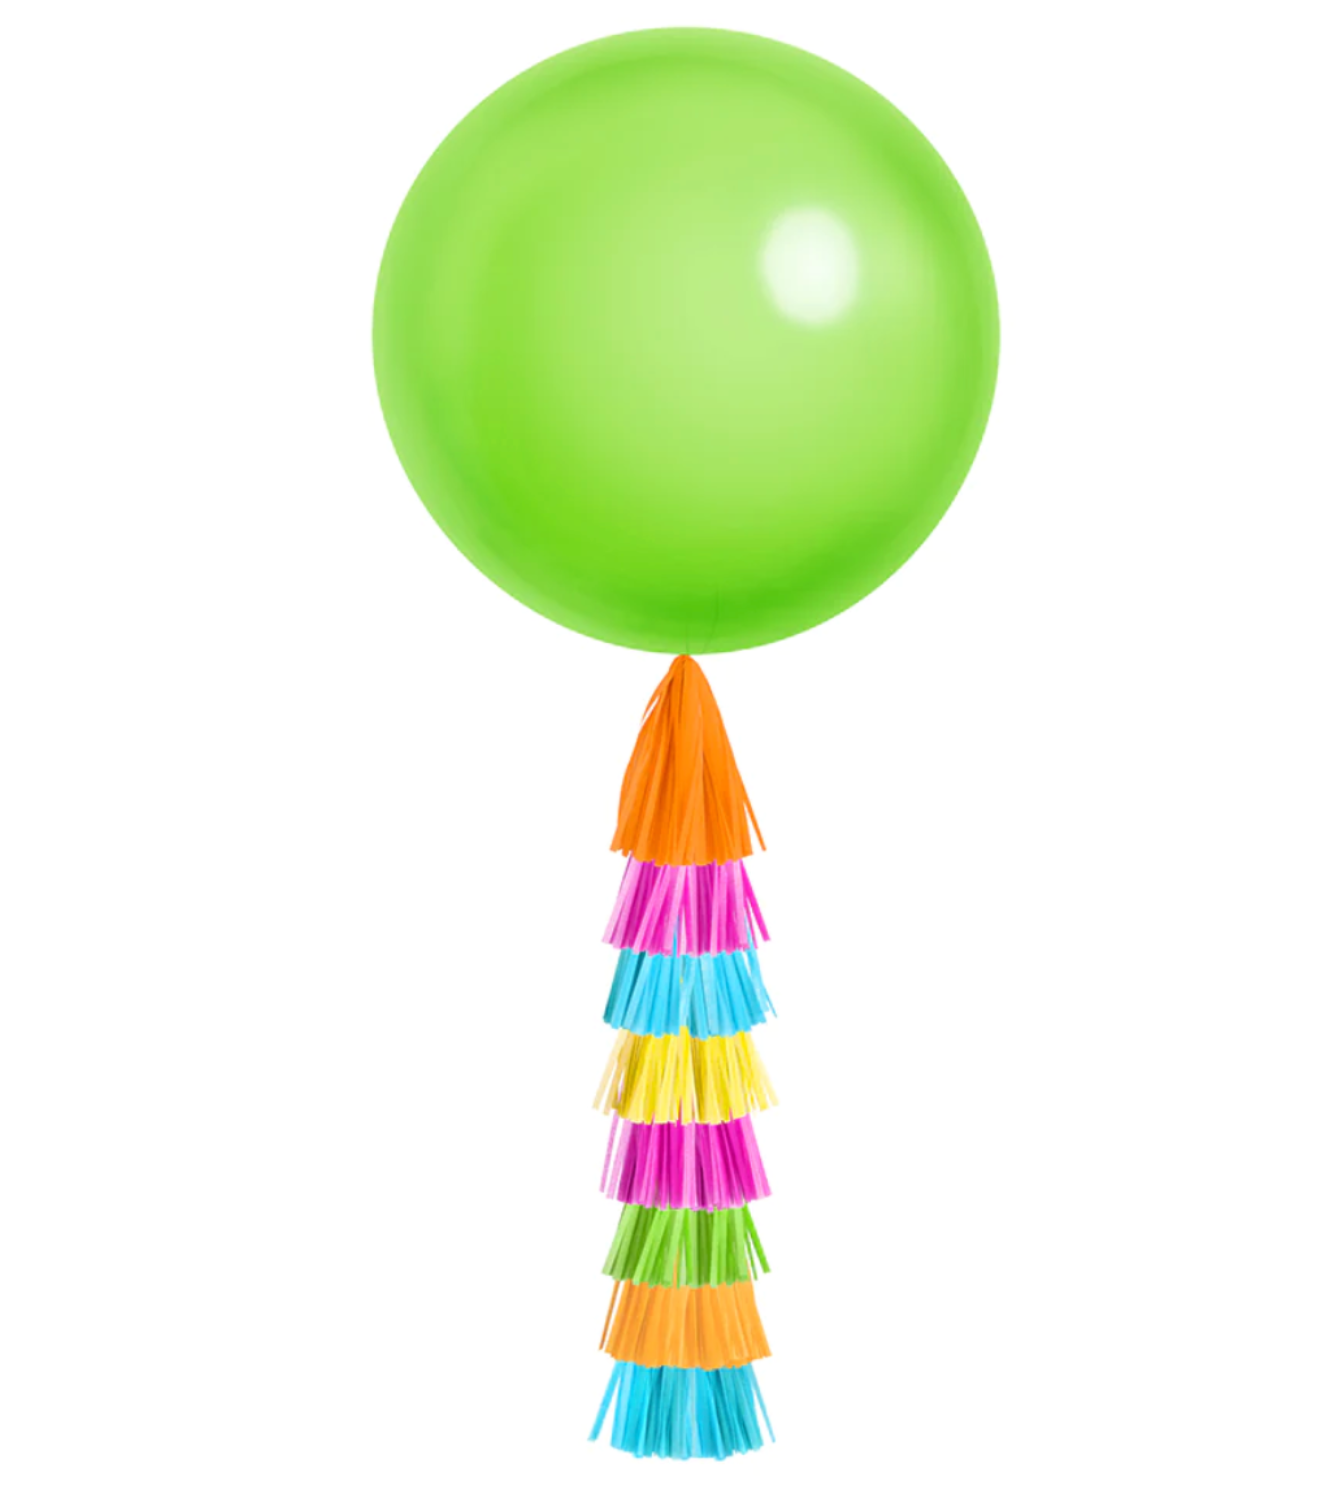 Giant Balloon with Tassels - Rose, Yellow, Green & Blue